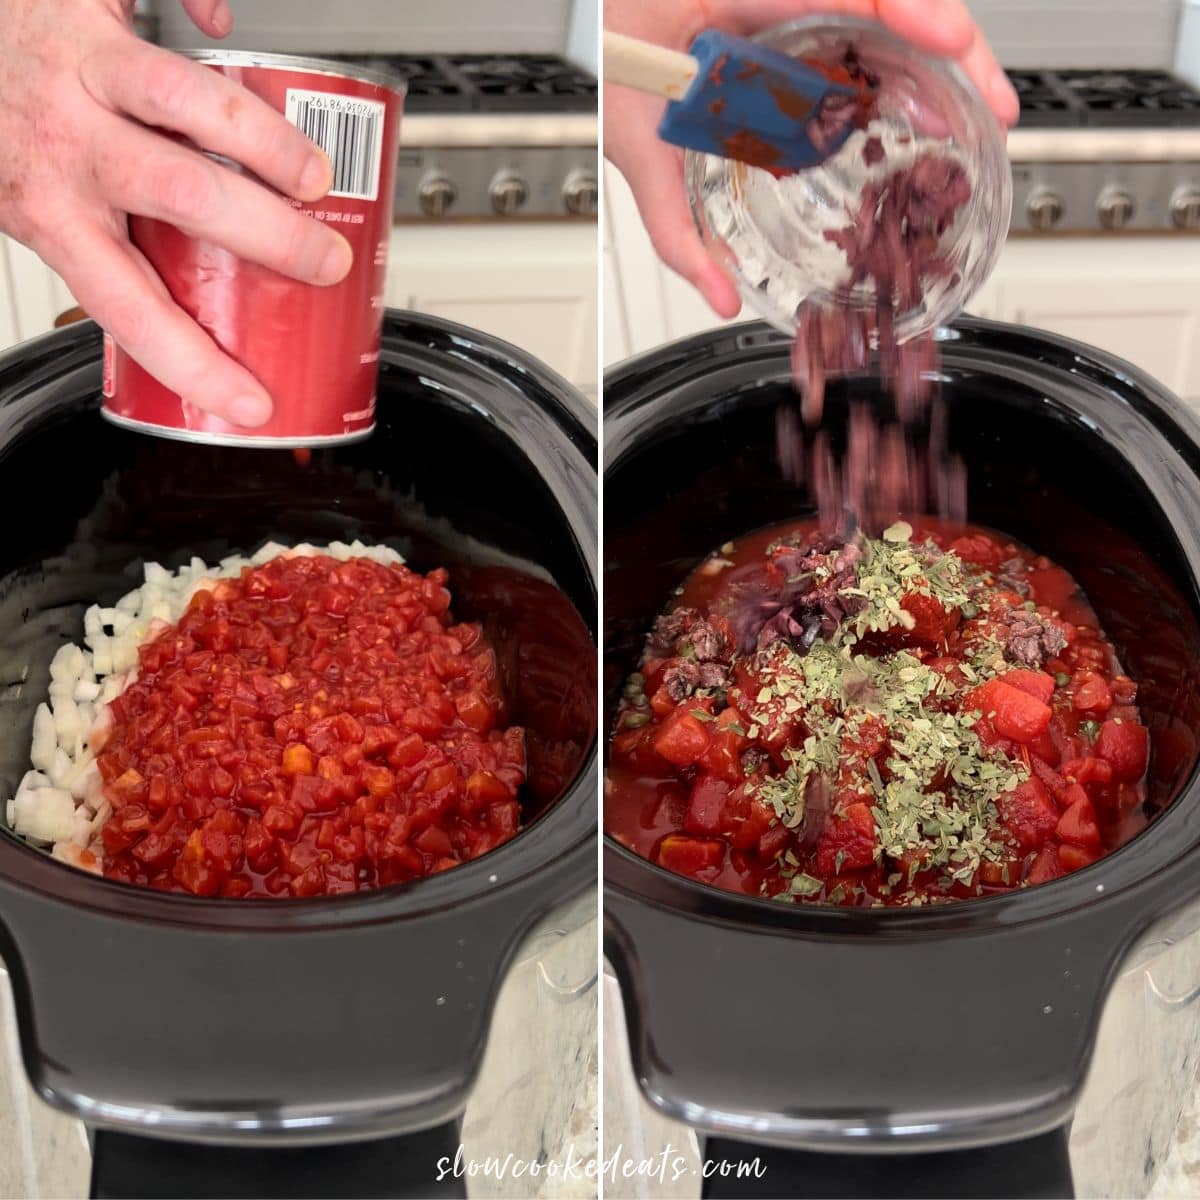 Adding puttanesca sauce ingredients to a black oval crock pot.